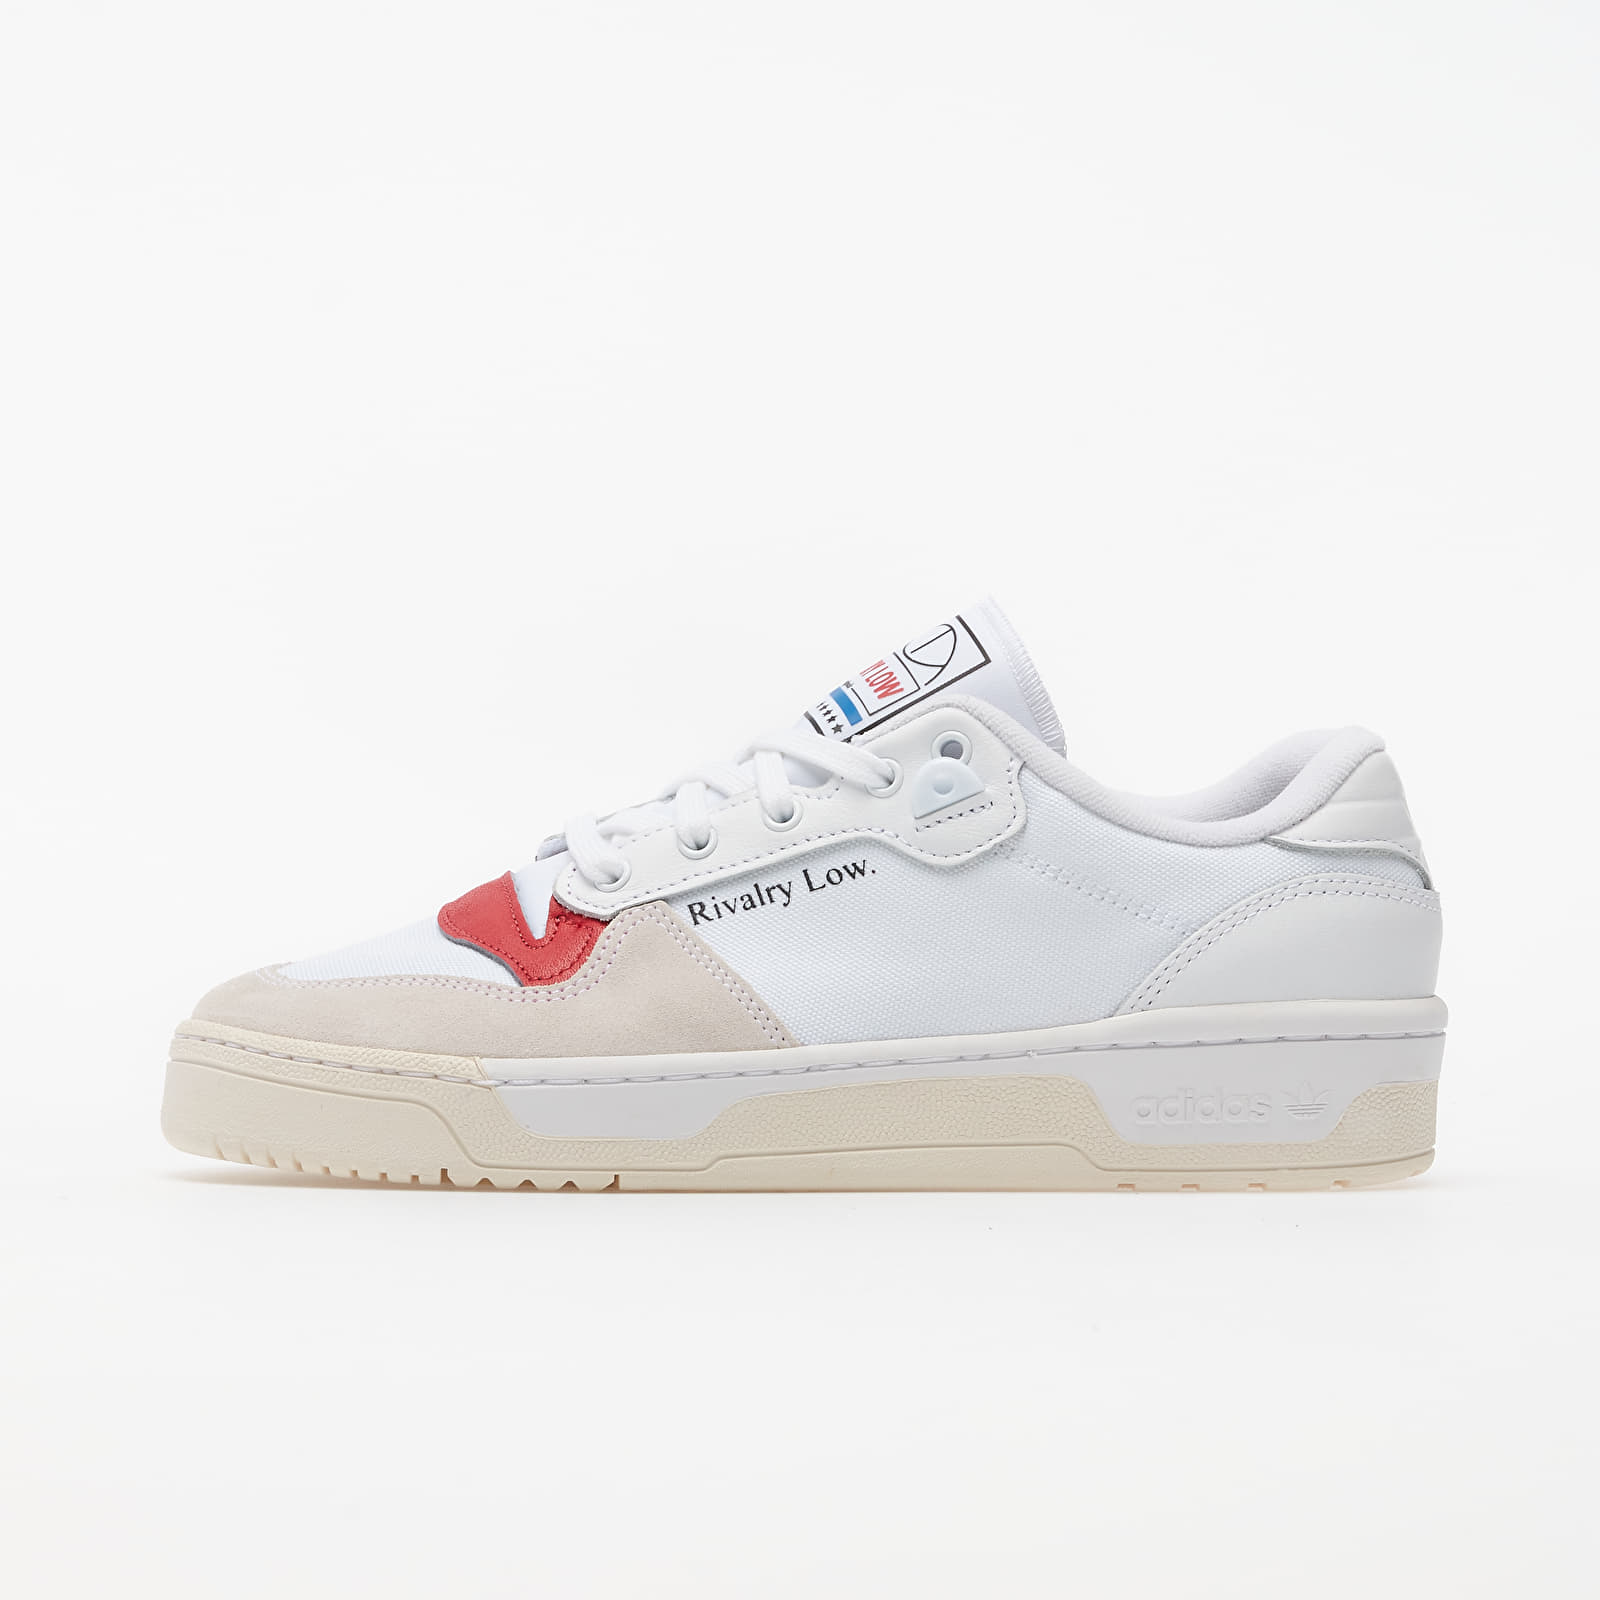 Chaussures et baskets homme adidas Rivalry Low Ftw White/ Core White/ Glow Red